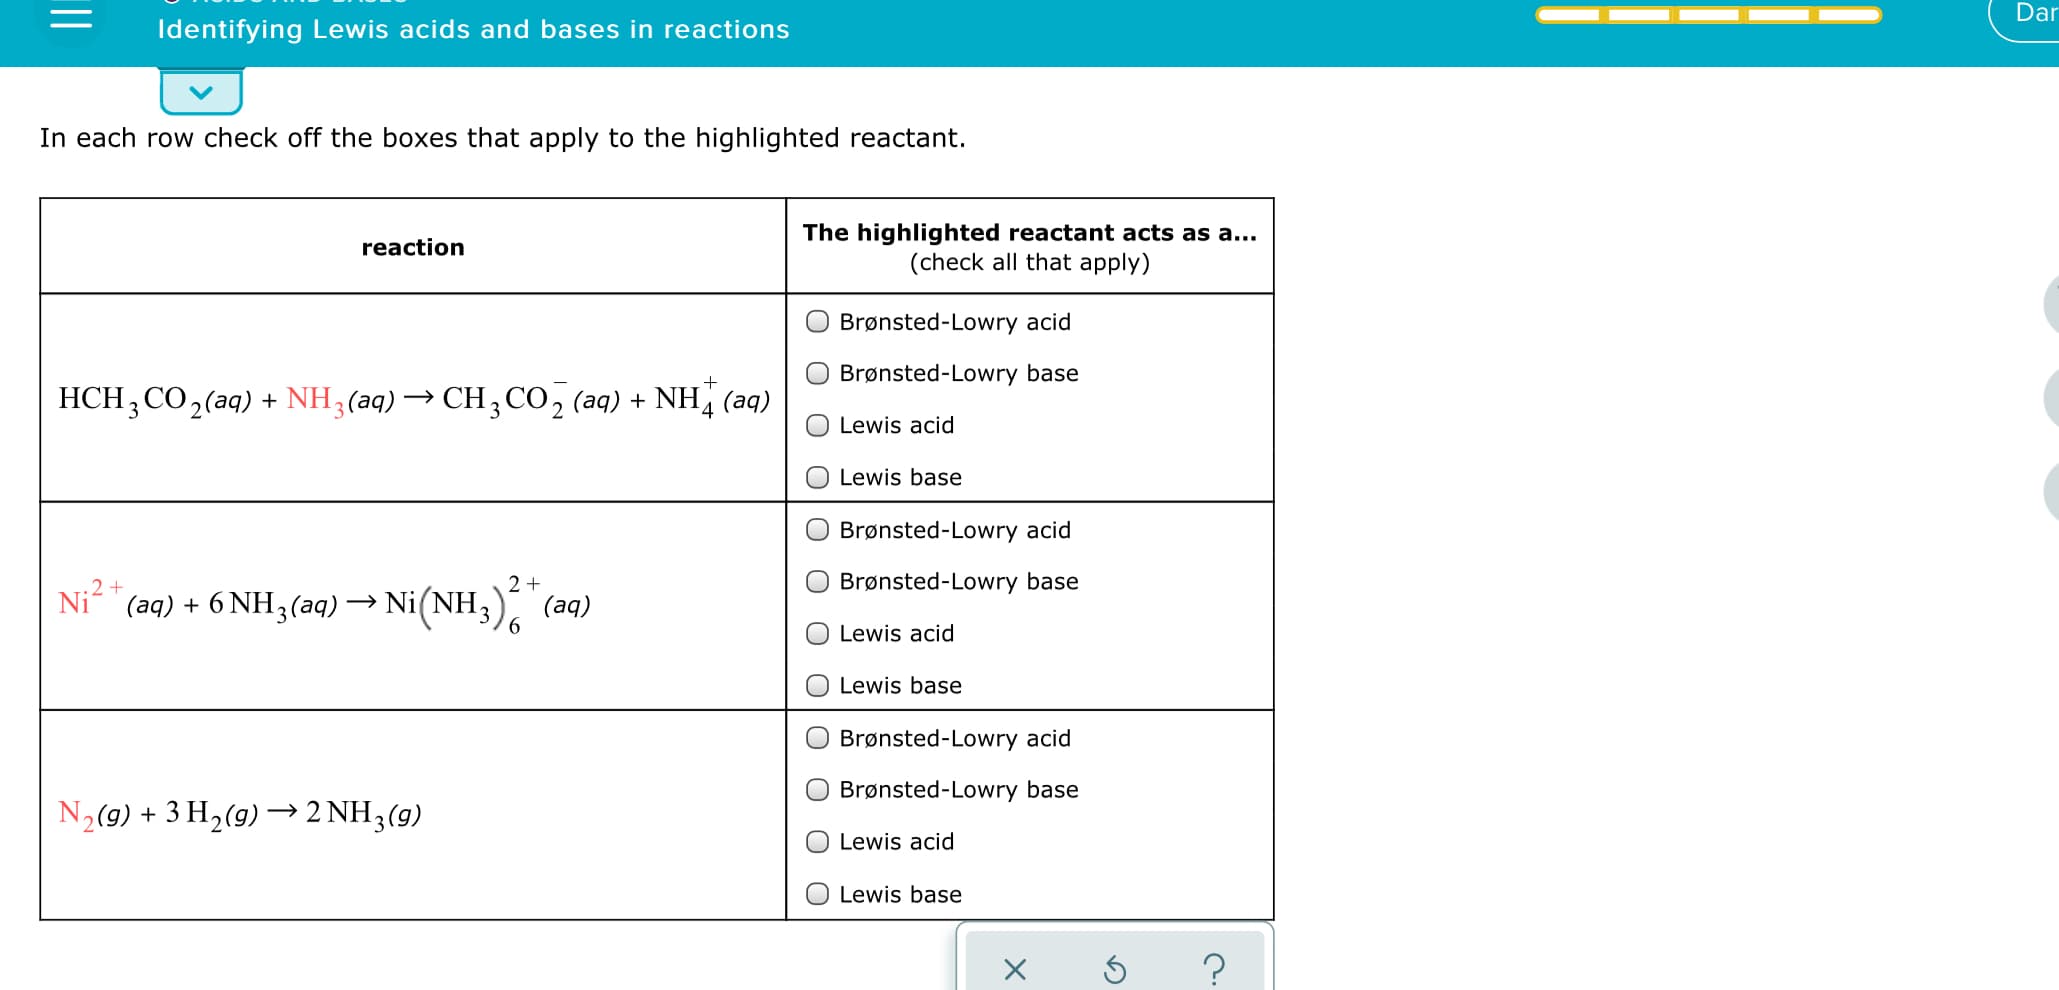 Dar
Identifying Lewis acids and bases in reactions
In each row check off the boxes that apply to the highlighted reactant.
The highlighted reactant acts as a...
(check all that apply)
reaction
Brønsted-Lowry acid
Brønsted-Lowry base
HCH ; CO,(aq)
+ NH3(aq) → CH3CO2 (aq) + NH, (aq)
4
Lewis acid
Lewis base
Brønsted-Lowry acid
.2+
Brønsted-Lowry base
Ni (aq) + 6 NH3(aq) → Ni(NH3)
(aq)
6.
Lewis acid
Lewis base
Brønsted-Lowry acid
Brønsted-Lowry base
N2(9) + 3 H2(g) –→2 NH3(g)
Lewis acid
Lewis base
